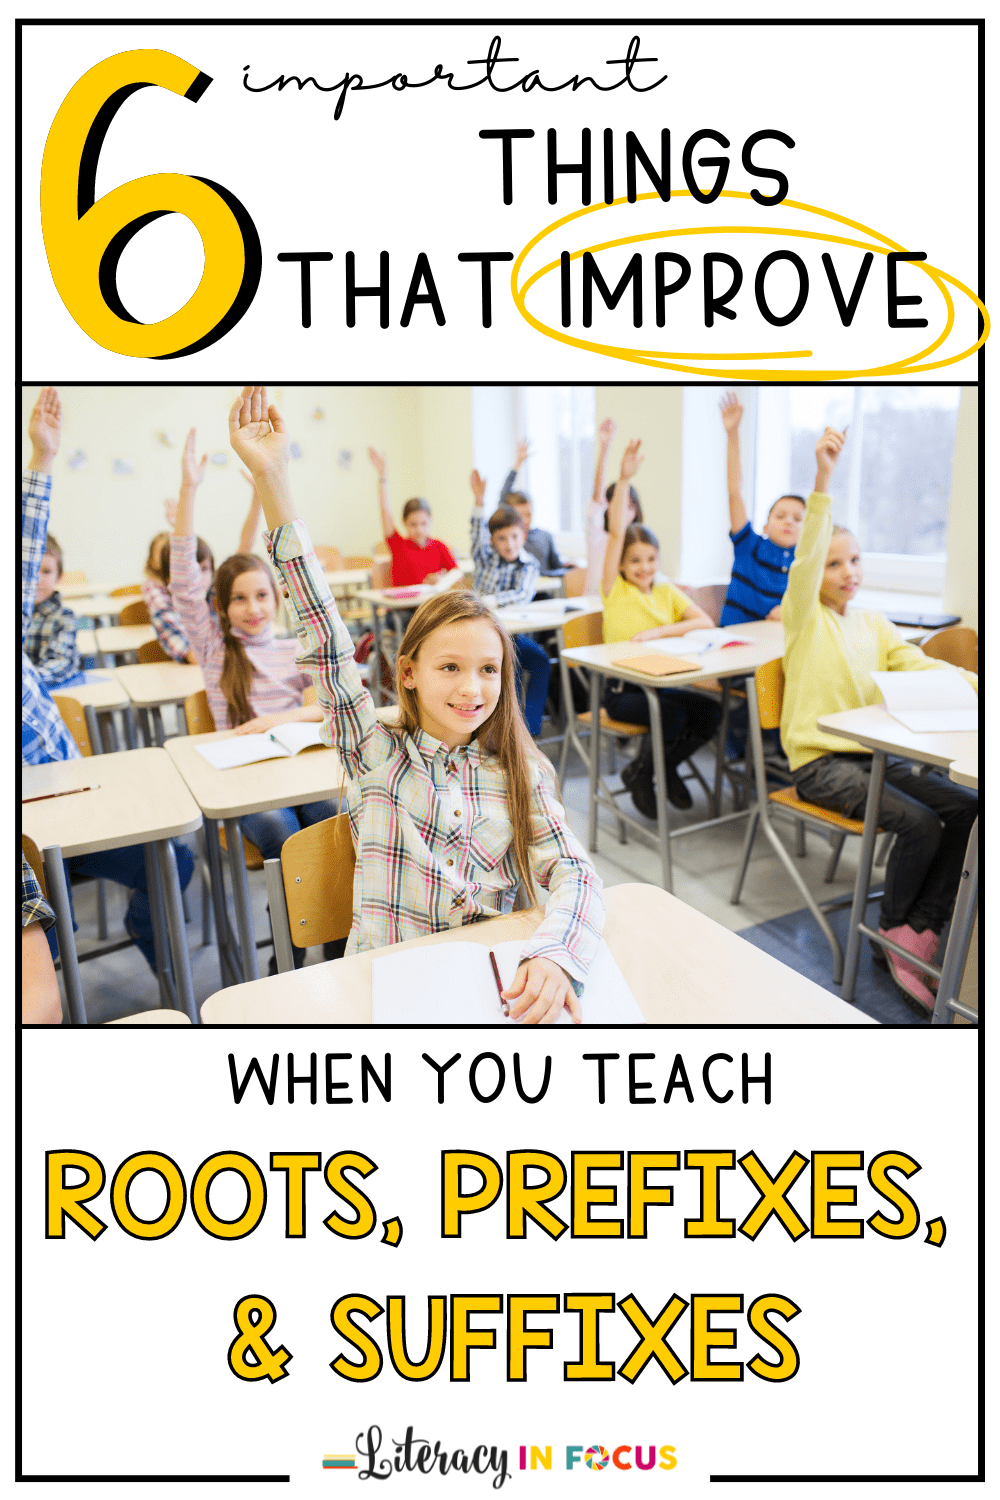 6 Things That Improve When You Teach Roots, Prefixes, and Suffixes